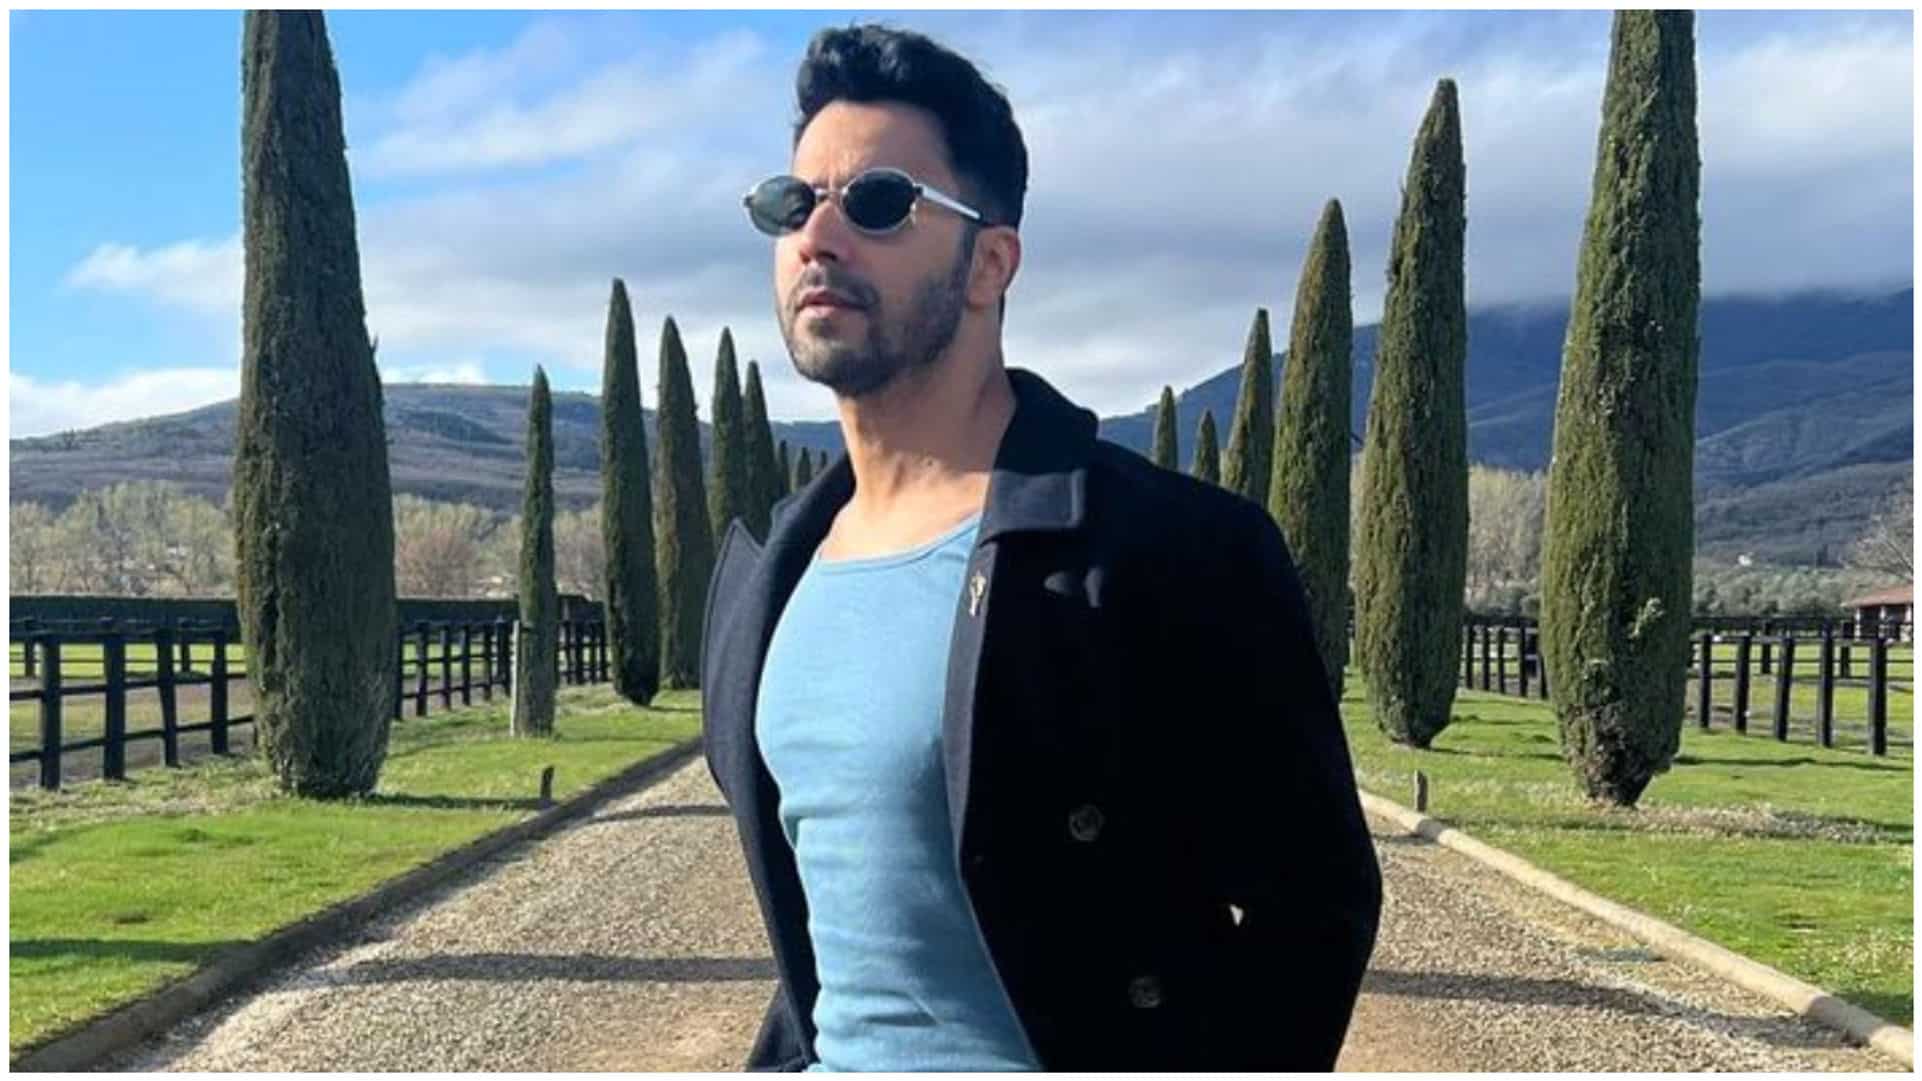 Varun Dhawan’s film Baby John postponed – Here’s when the film is likely to be released